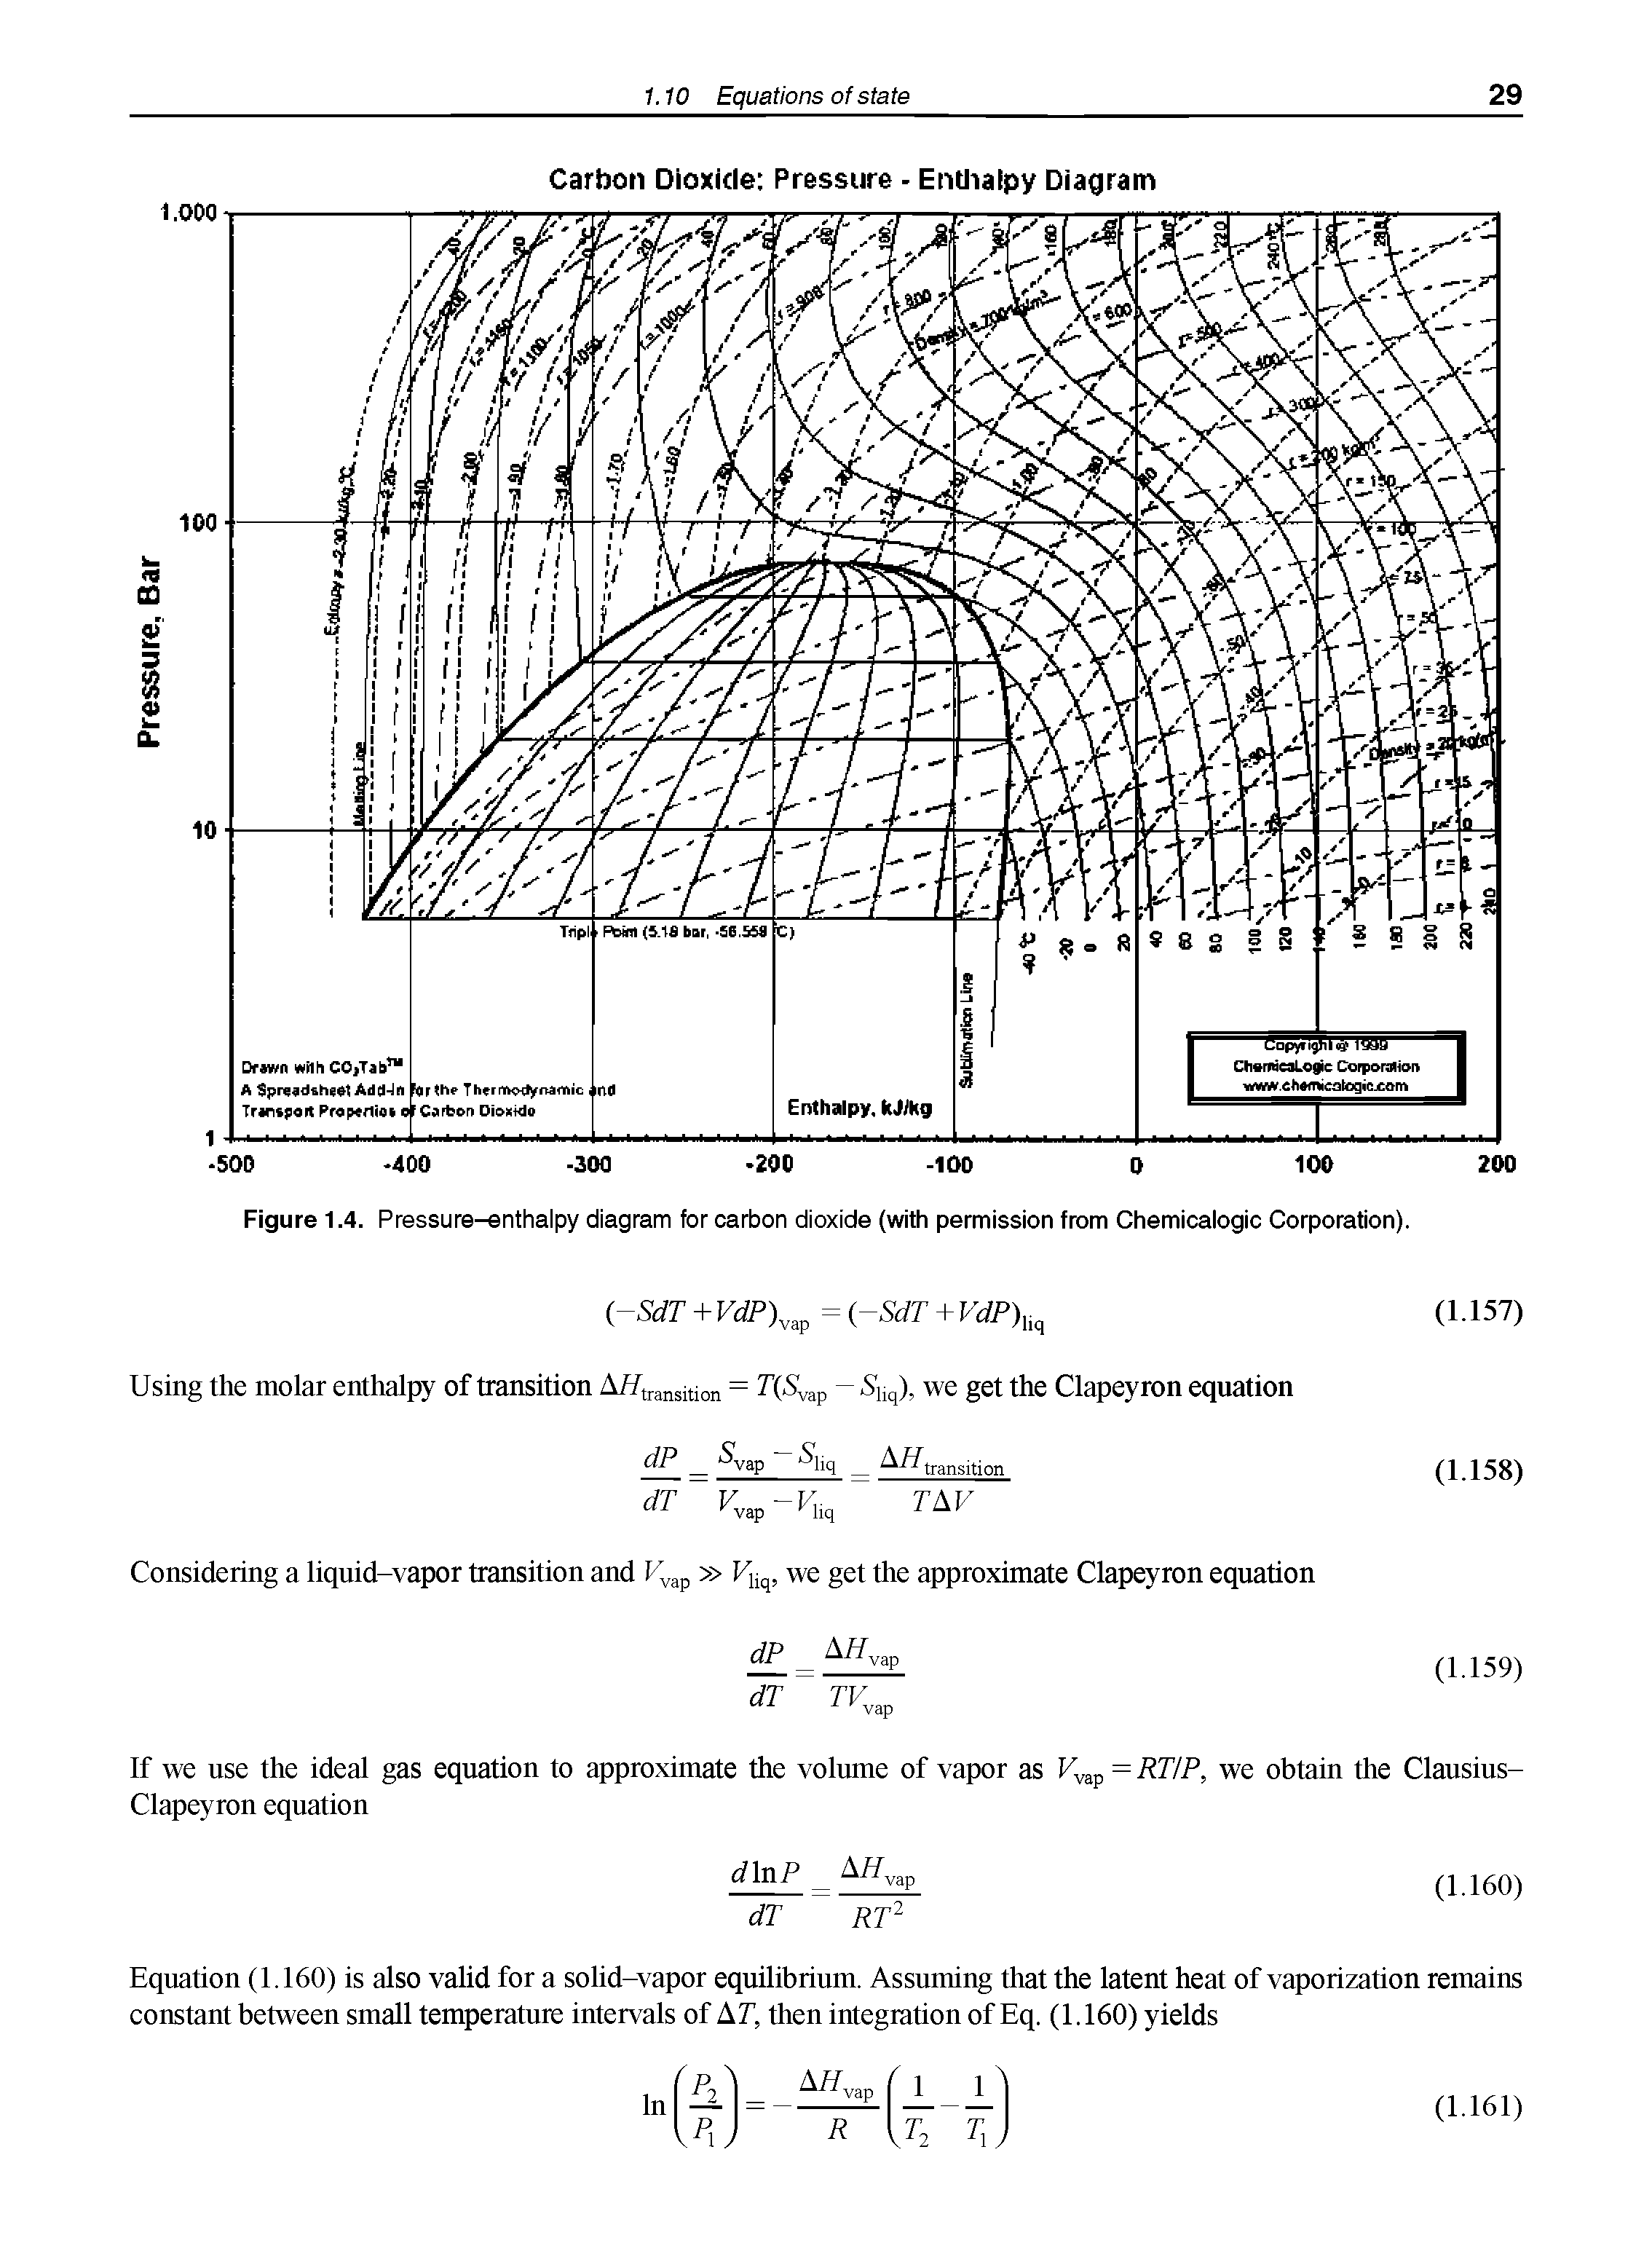 Figure 1.4. Pressure-enthalpy diagram for carbon dioxide (with permission from Chemicalogic Corporation).